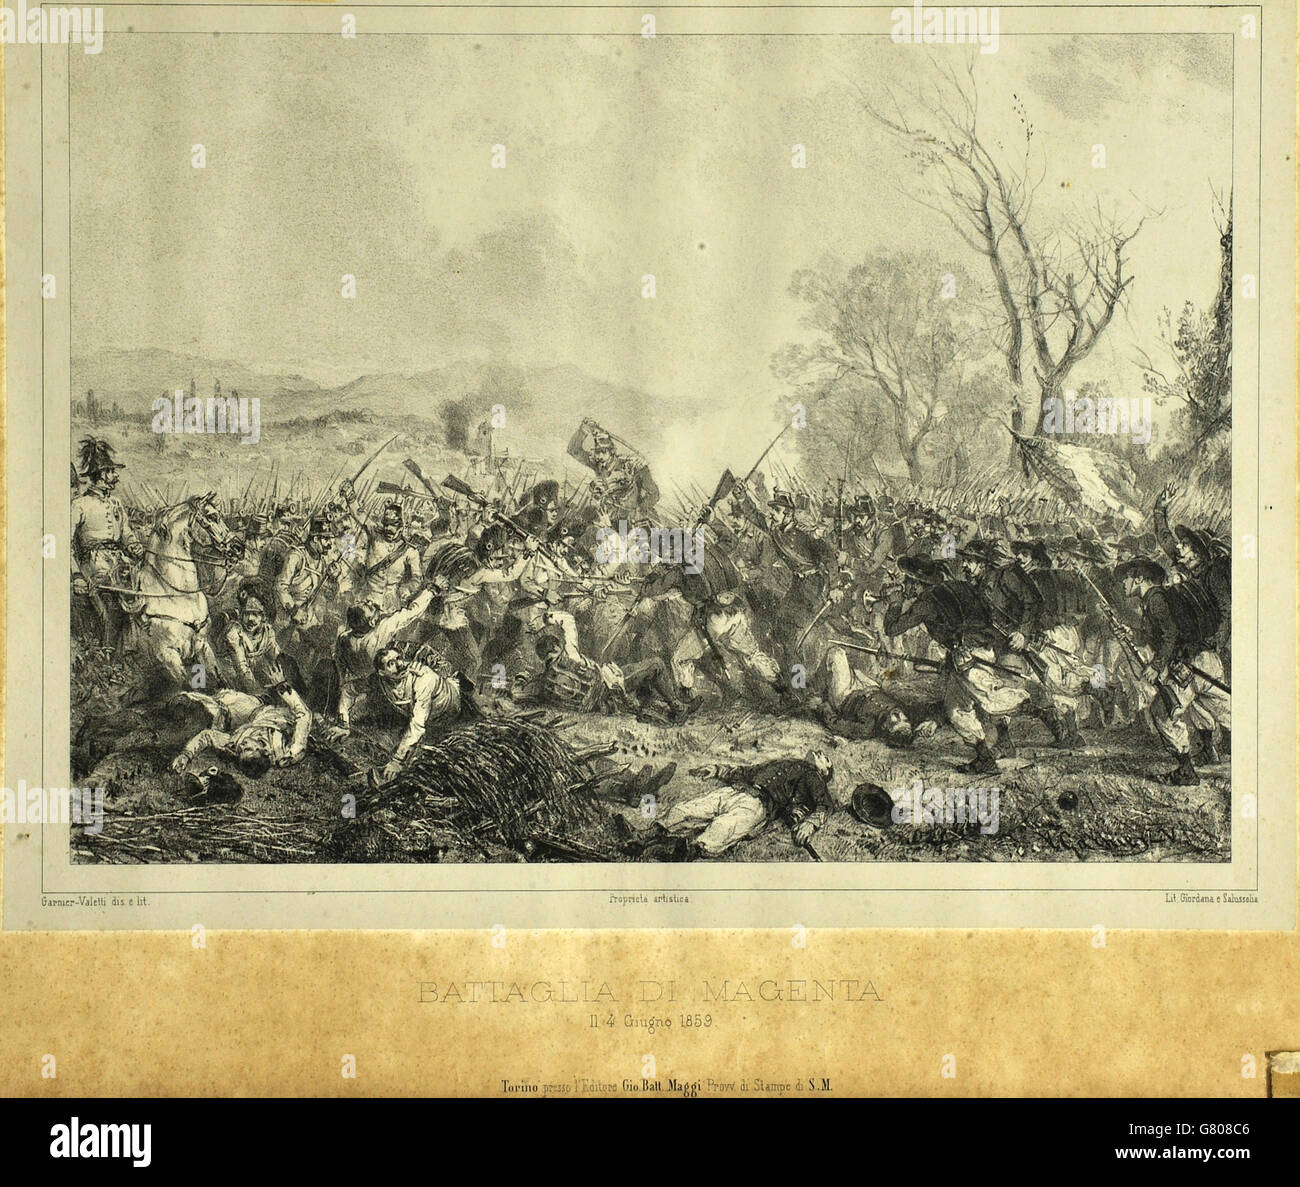 National Historical Museum of Artillery Print Depicting the battle of magenta June 4, 1859 Stock Photo